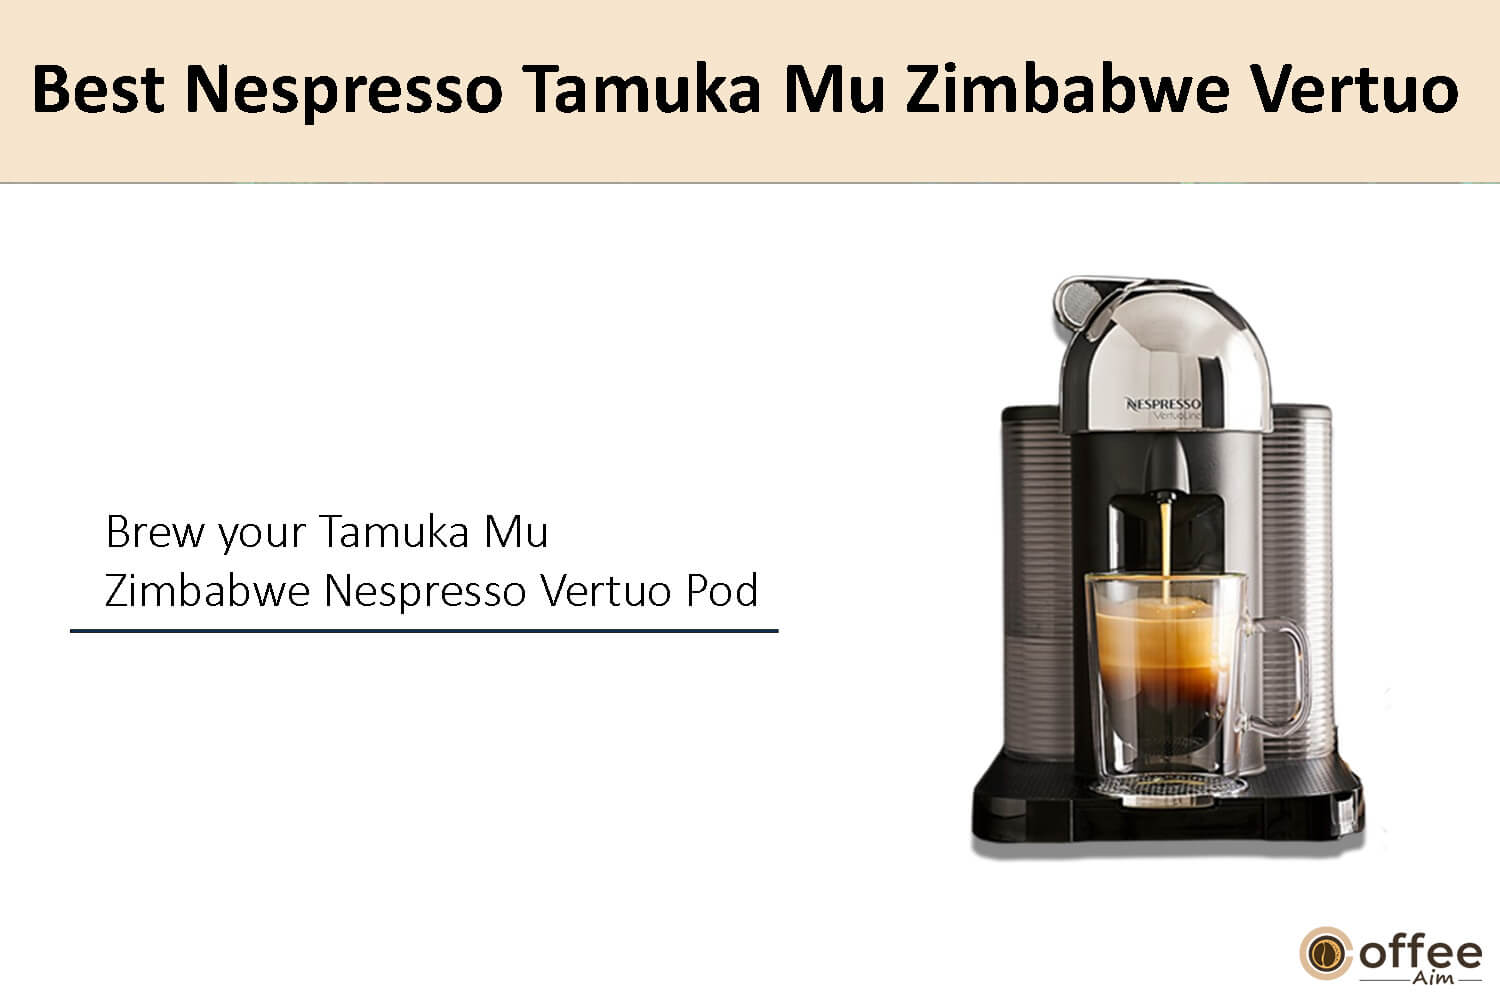 In this image, I elucidate the preparation instructions for crafting the finest Nespresso  Tamuka MU Zimbabwe Vertuo coffee pod.